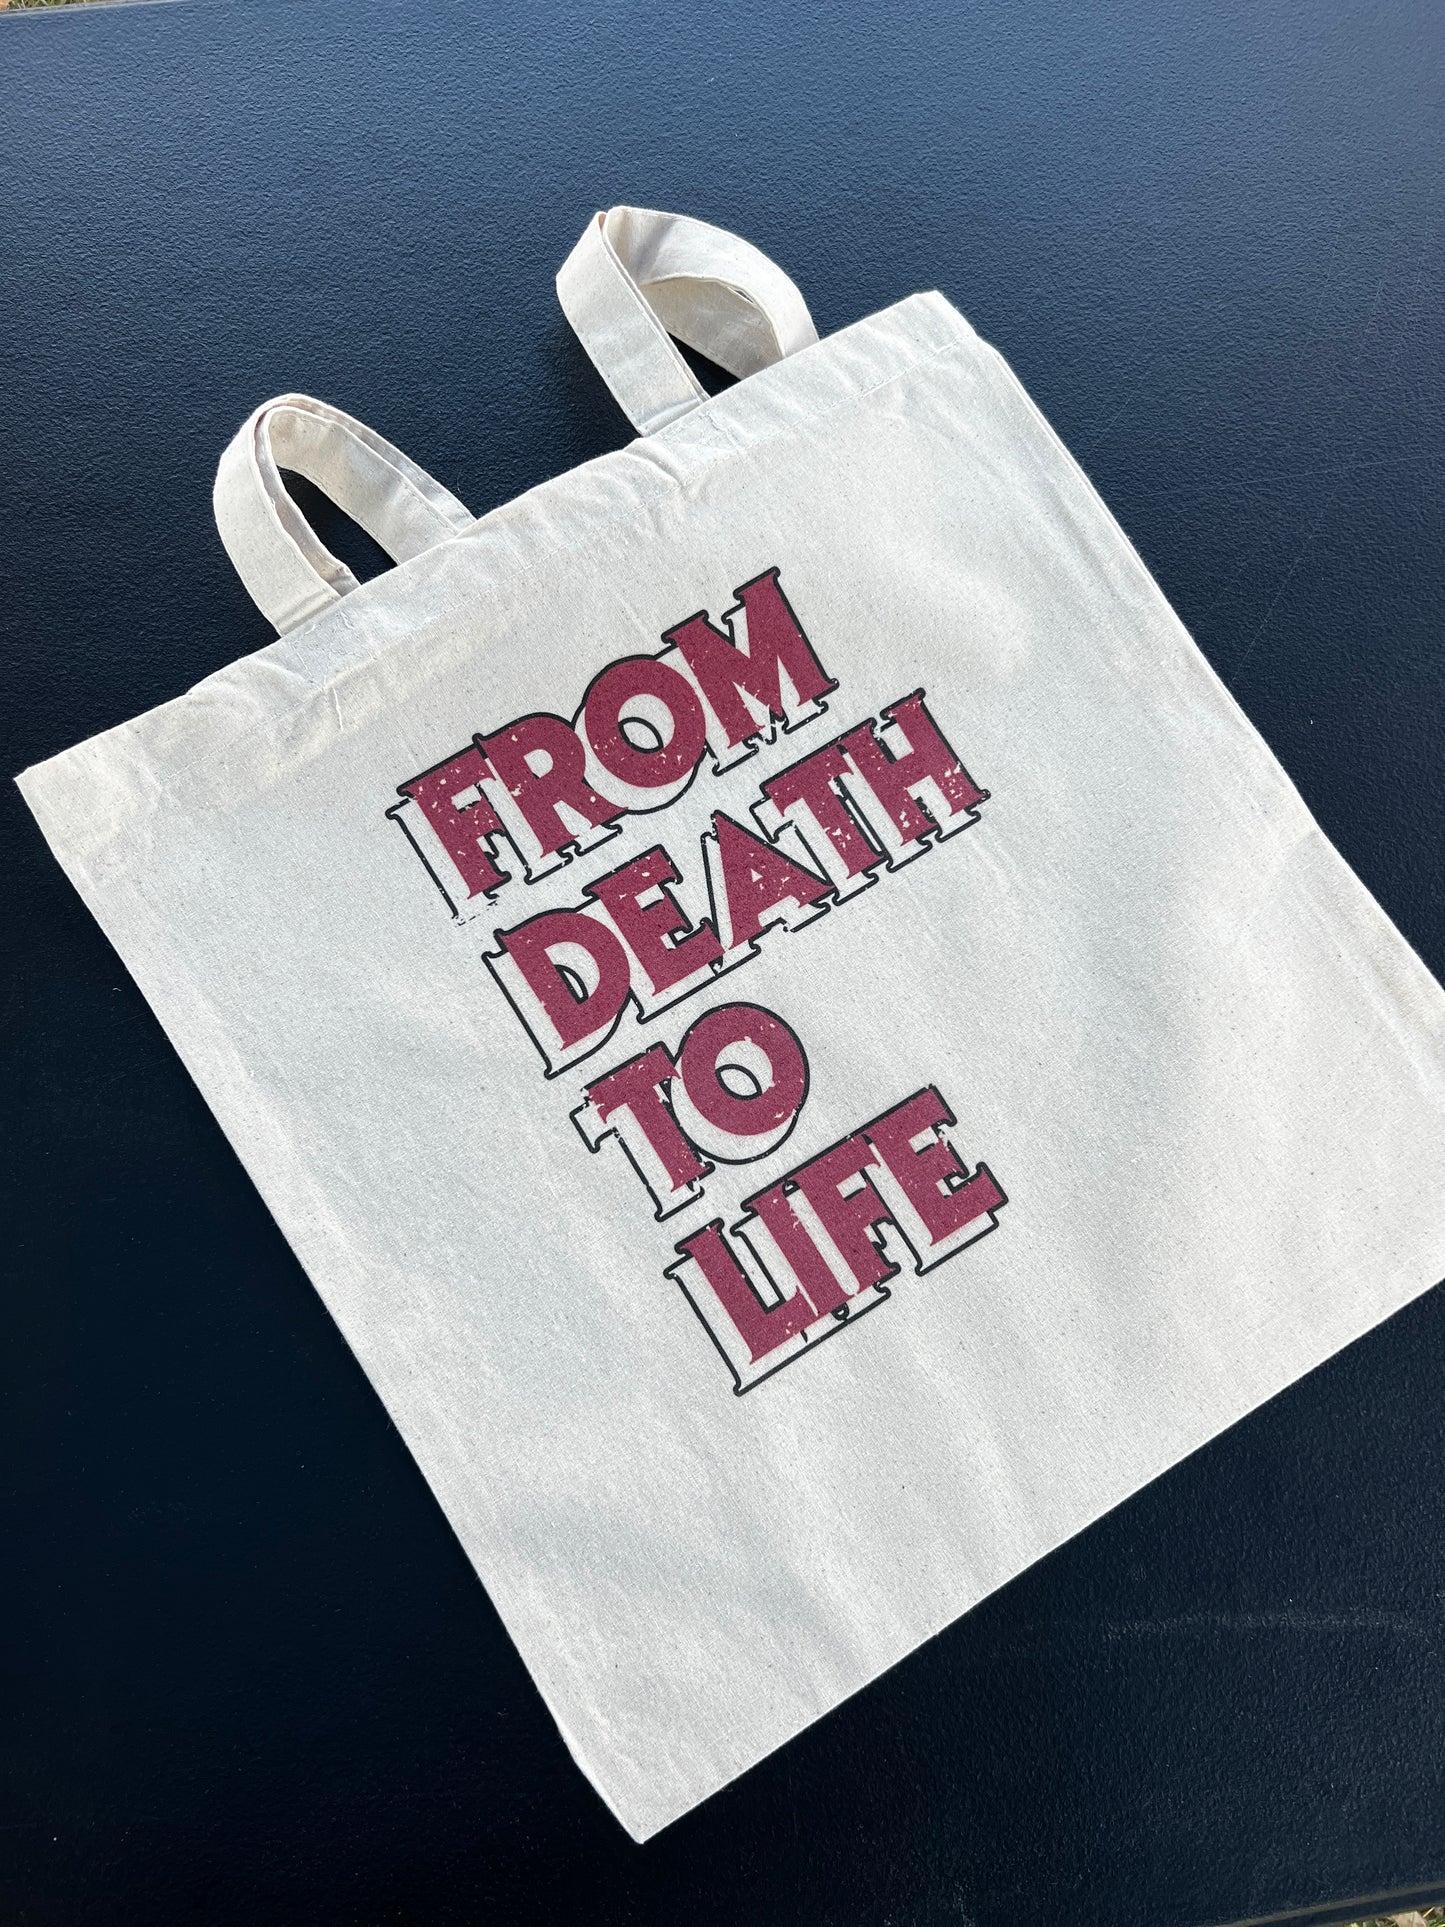 From Death to Life Tote